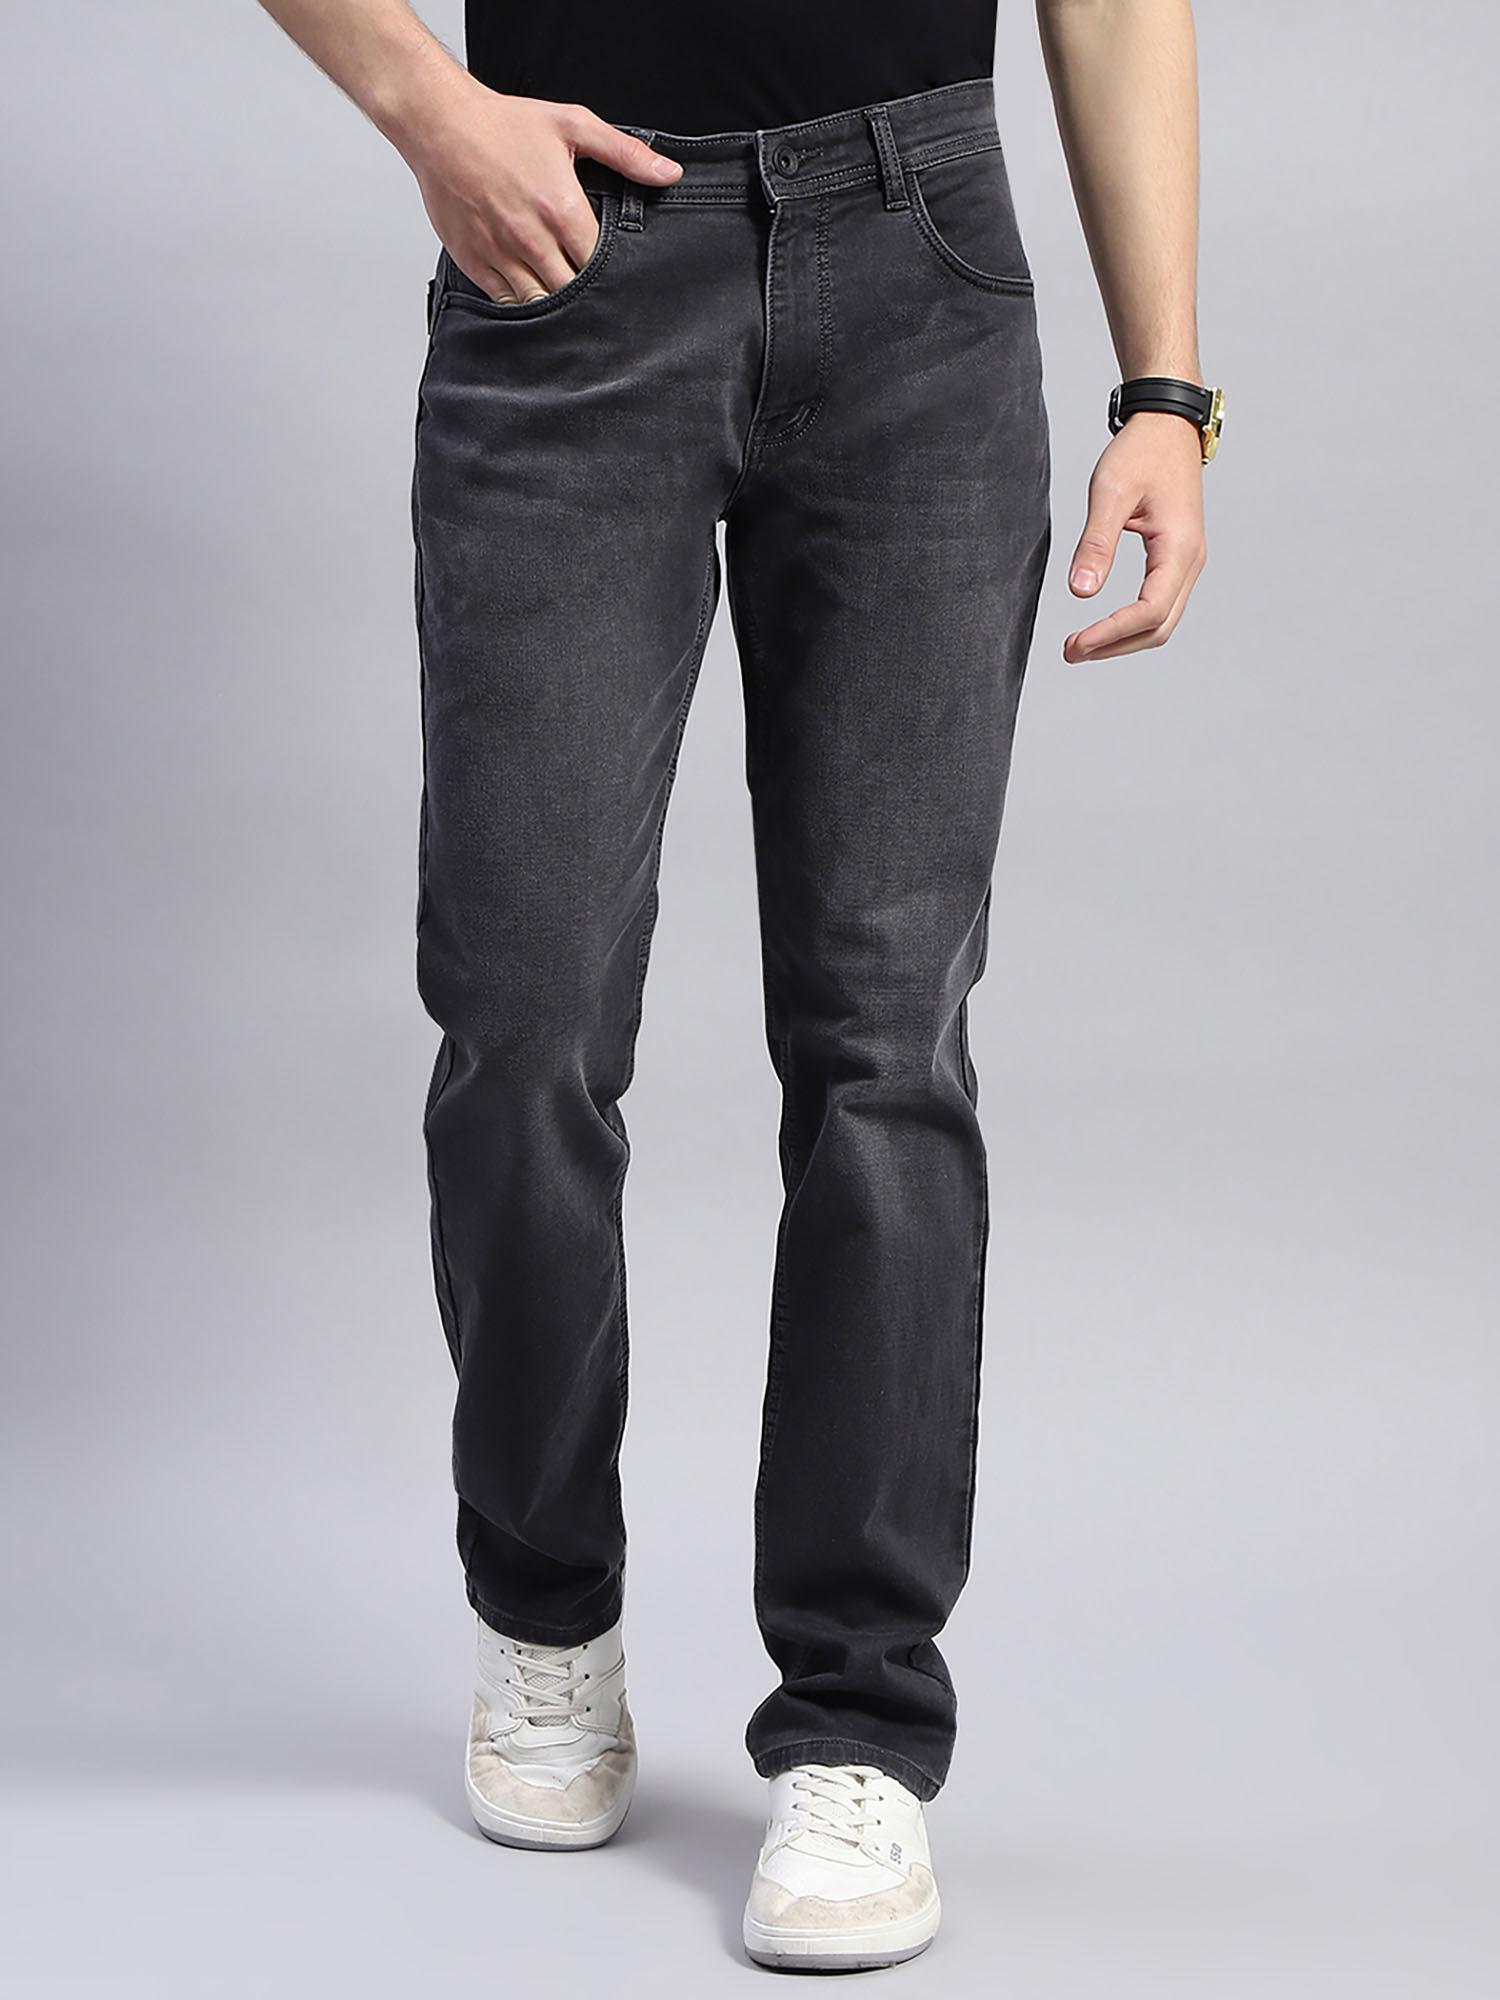 mens-solid-grey-straight-fit-casual-jeans